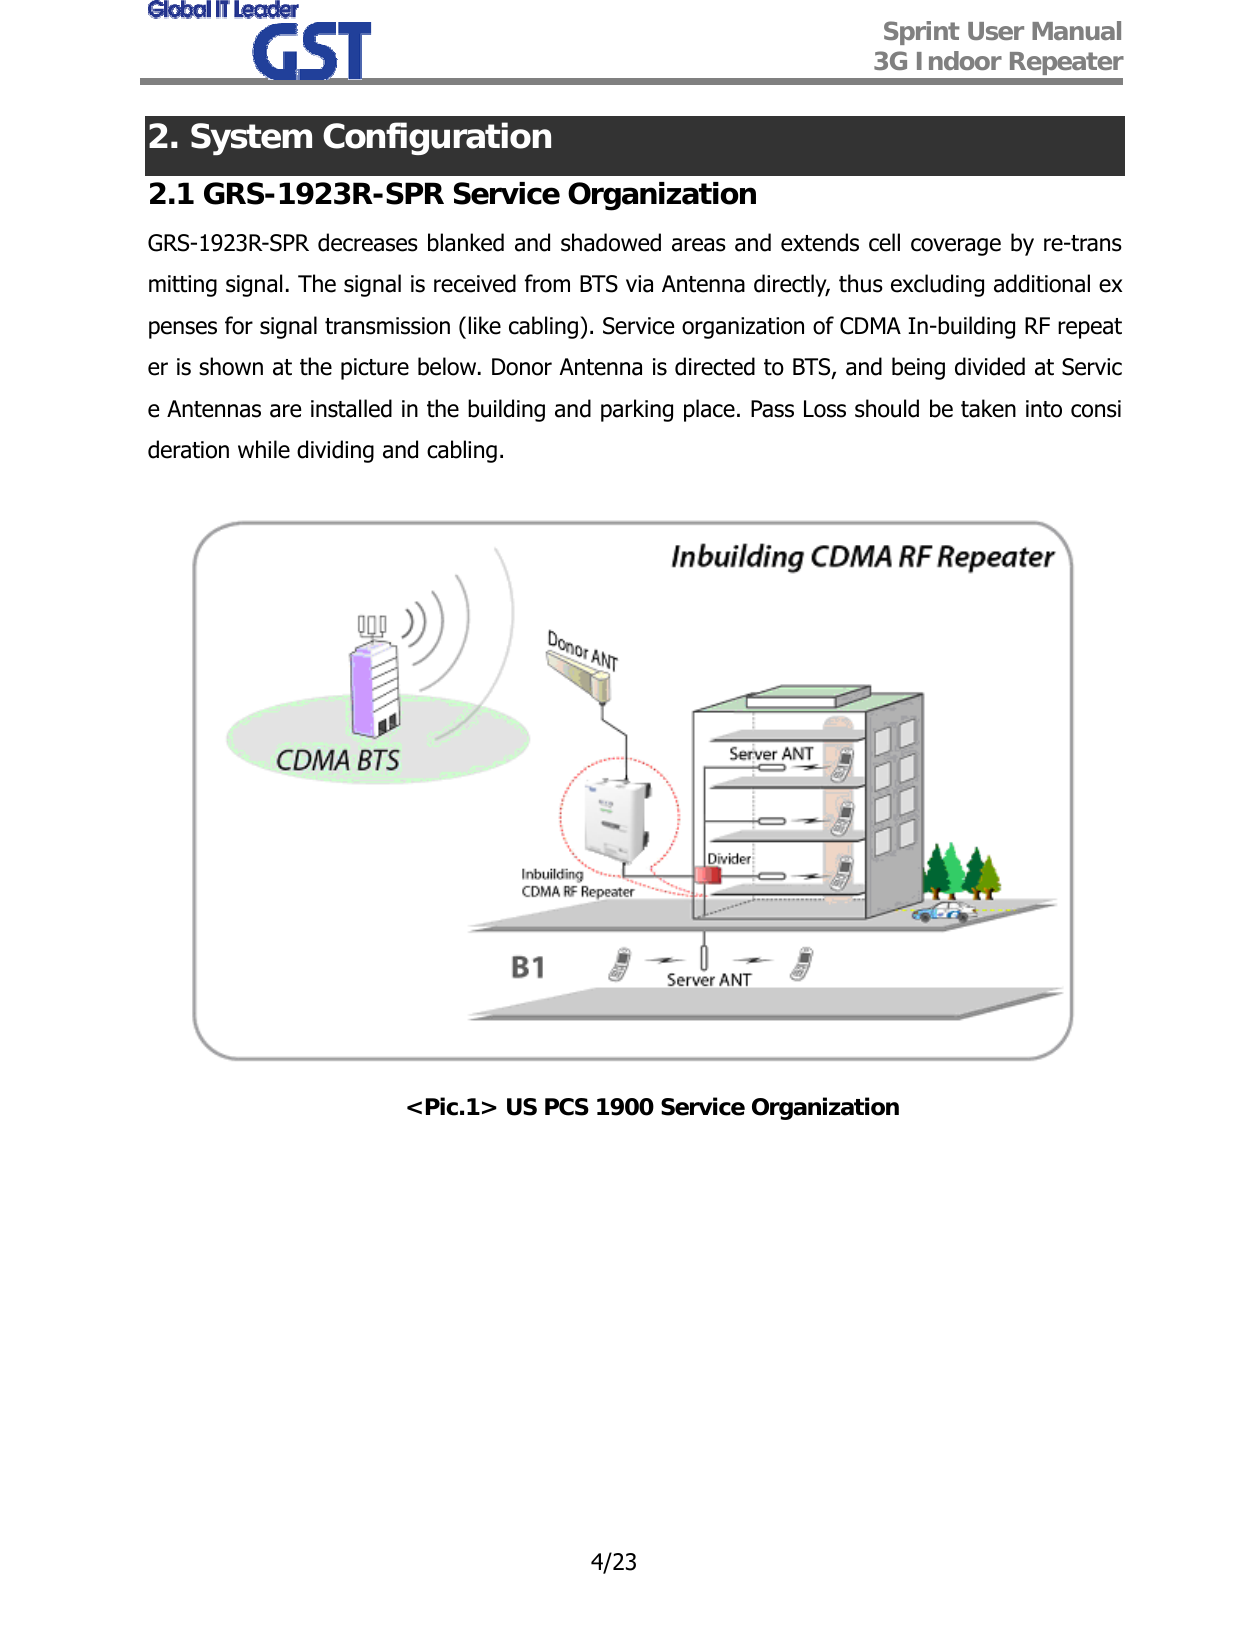  Sprint User Manual 3G Indoor Repeater   4/23 2. System Configuration 2.1 GRS-1923R-SPR Service Organization GRS-1923R-SPR decreases blanked and shadowed areas and extends cell coverage by re-transmitting signal. The signal is received from BTS via Antenna directly, thus excluding additional expenses for signal transmission (like cabling). Service organization of CDMA In-building RF repeater is shown at the picture below. Donor Antenna is directed to BTS, and being divided at Service Antennas are installed in the building and parking place. Pass Loss should be taken into consideration while dividing and cabling.   &lt;Pic.1&gt; US PCS 1900 Service Organization         